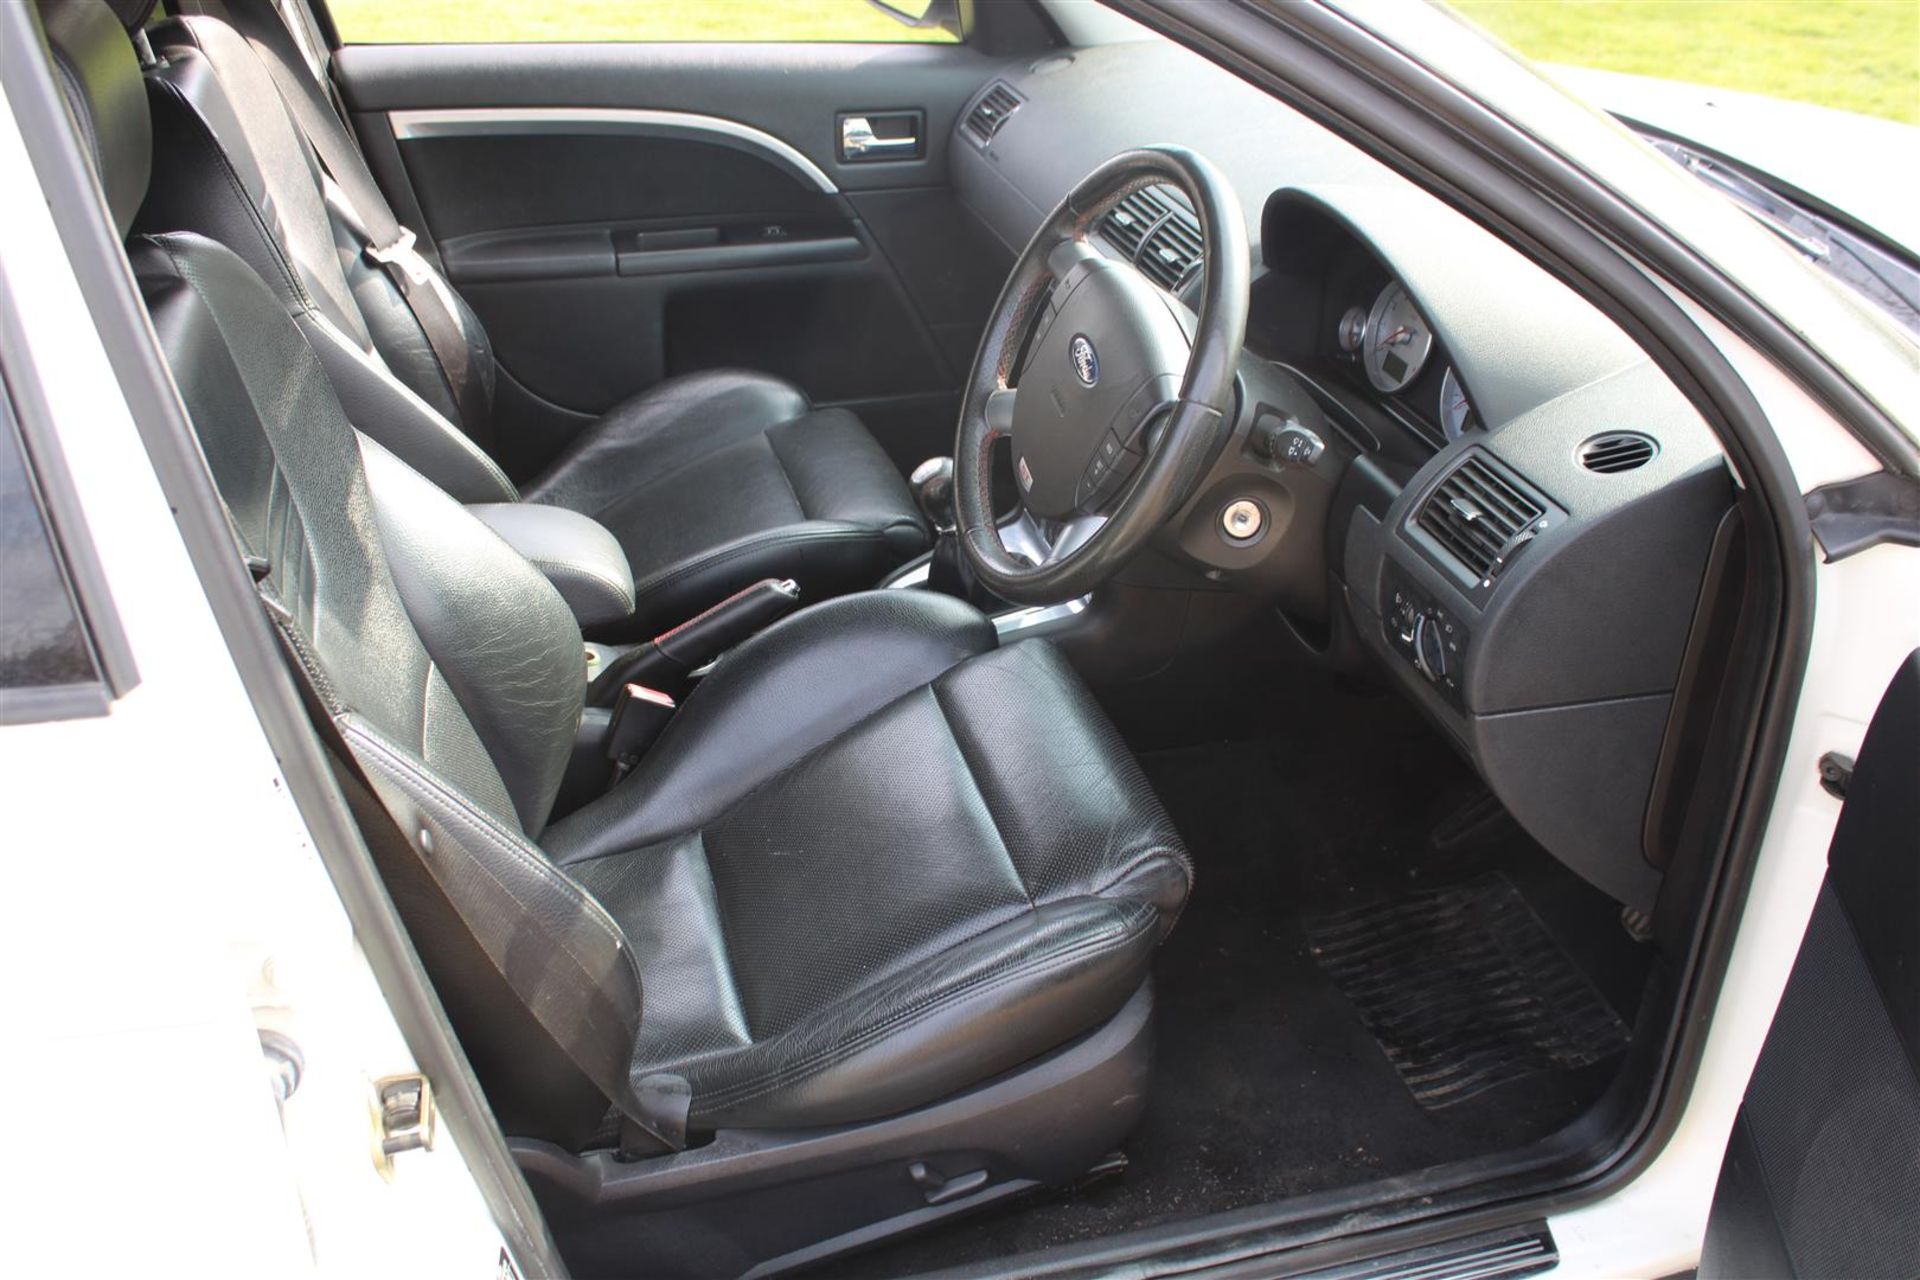 2005 Ford Mondeo ST220 Estate - Image 7 of 19